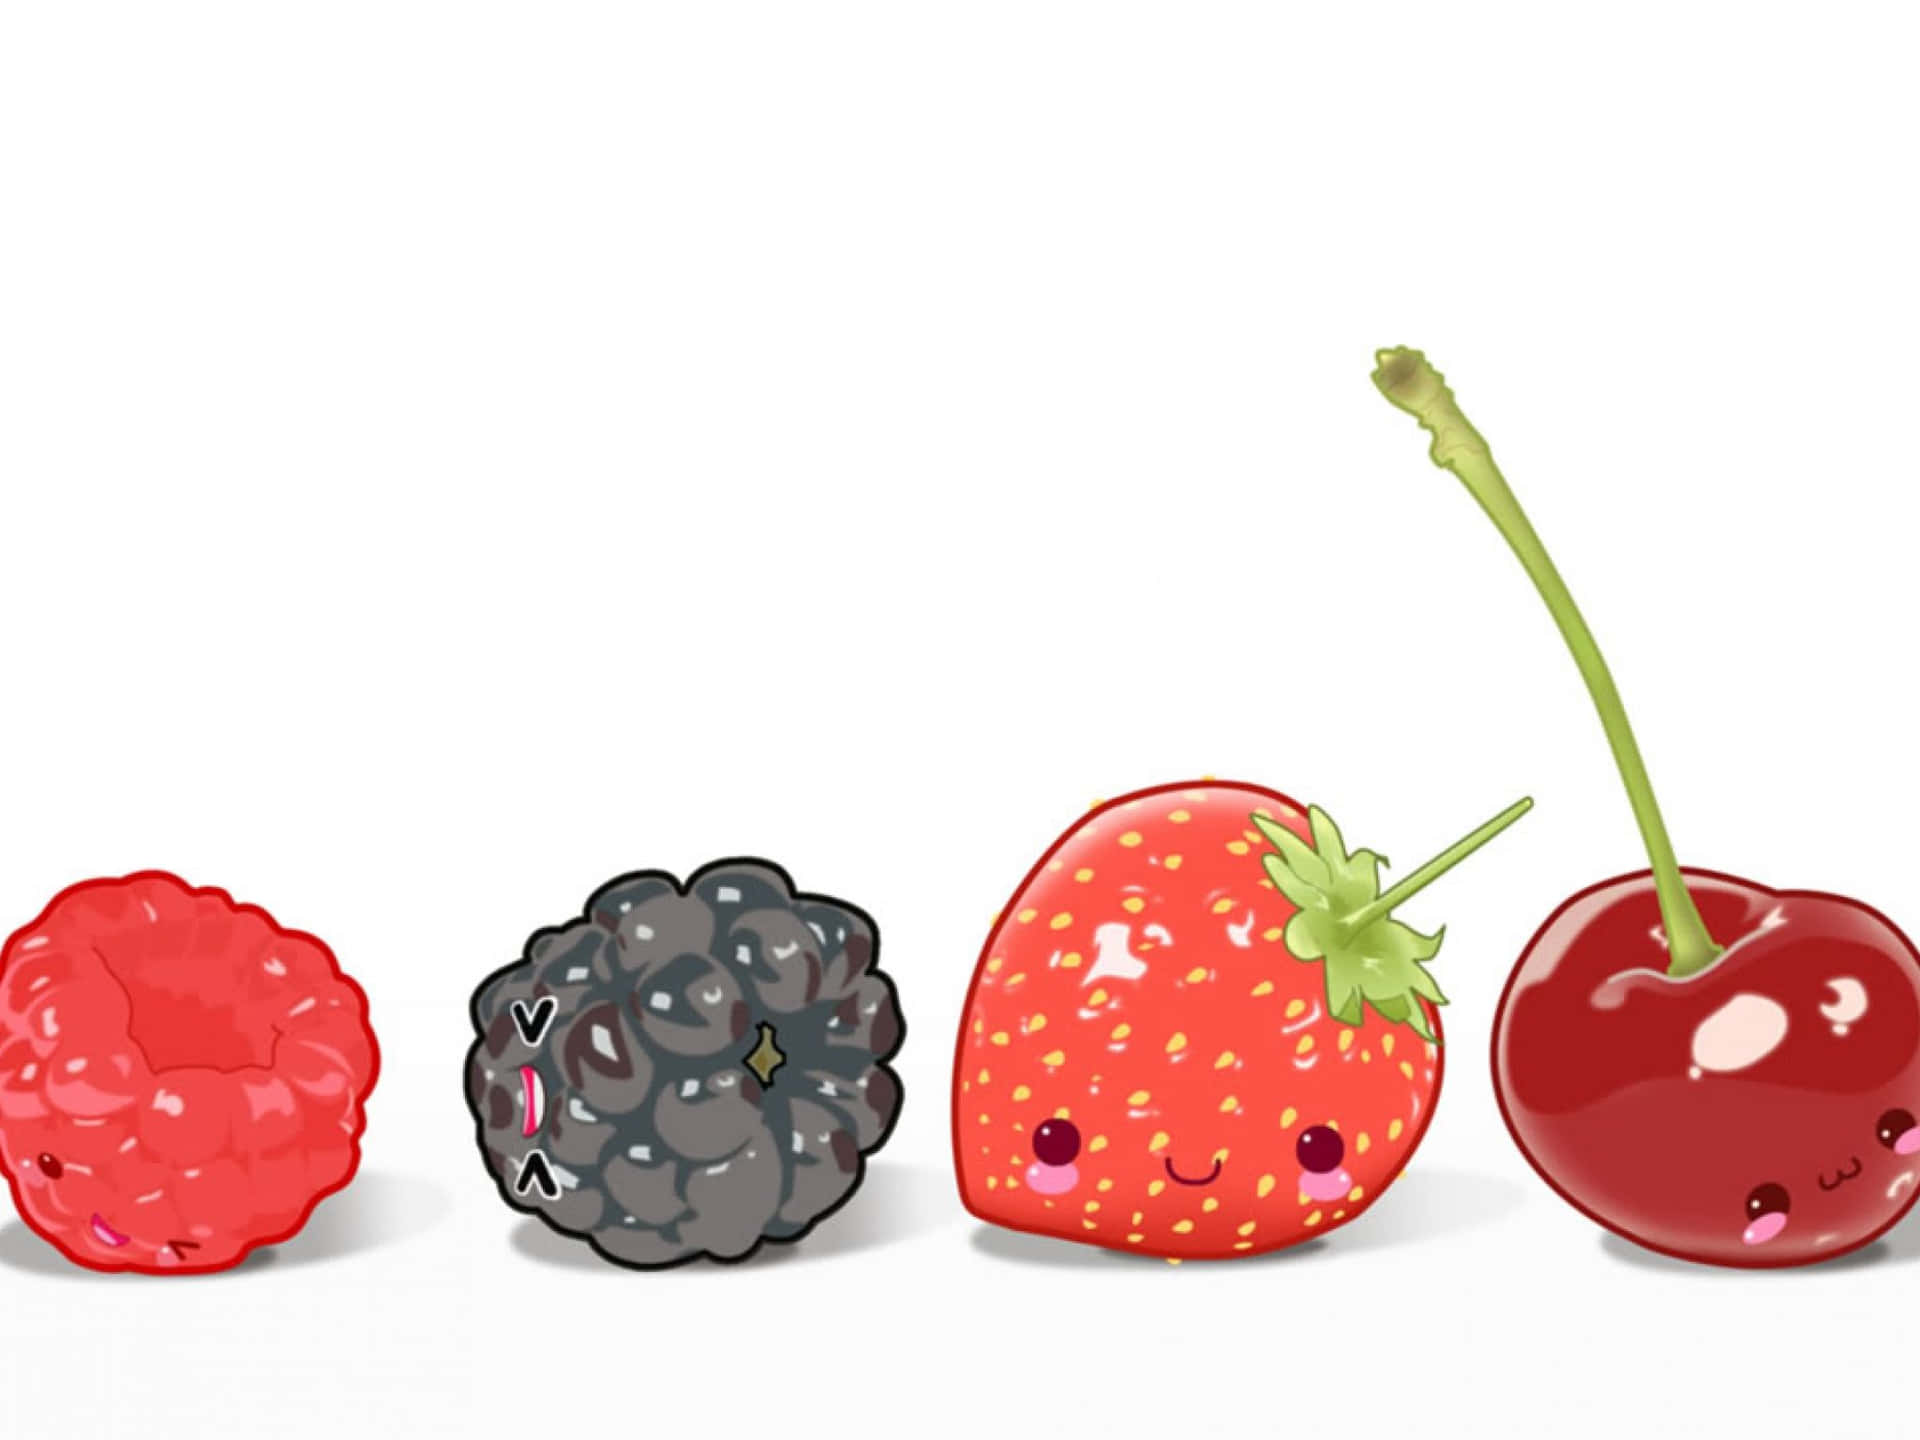 A Collection of Adorable Kawaii Fruits with Cute Faces and Expressions Wallpaper